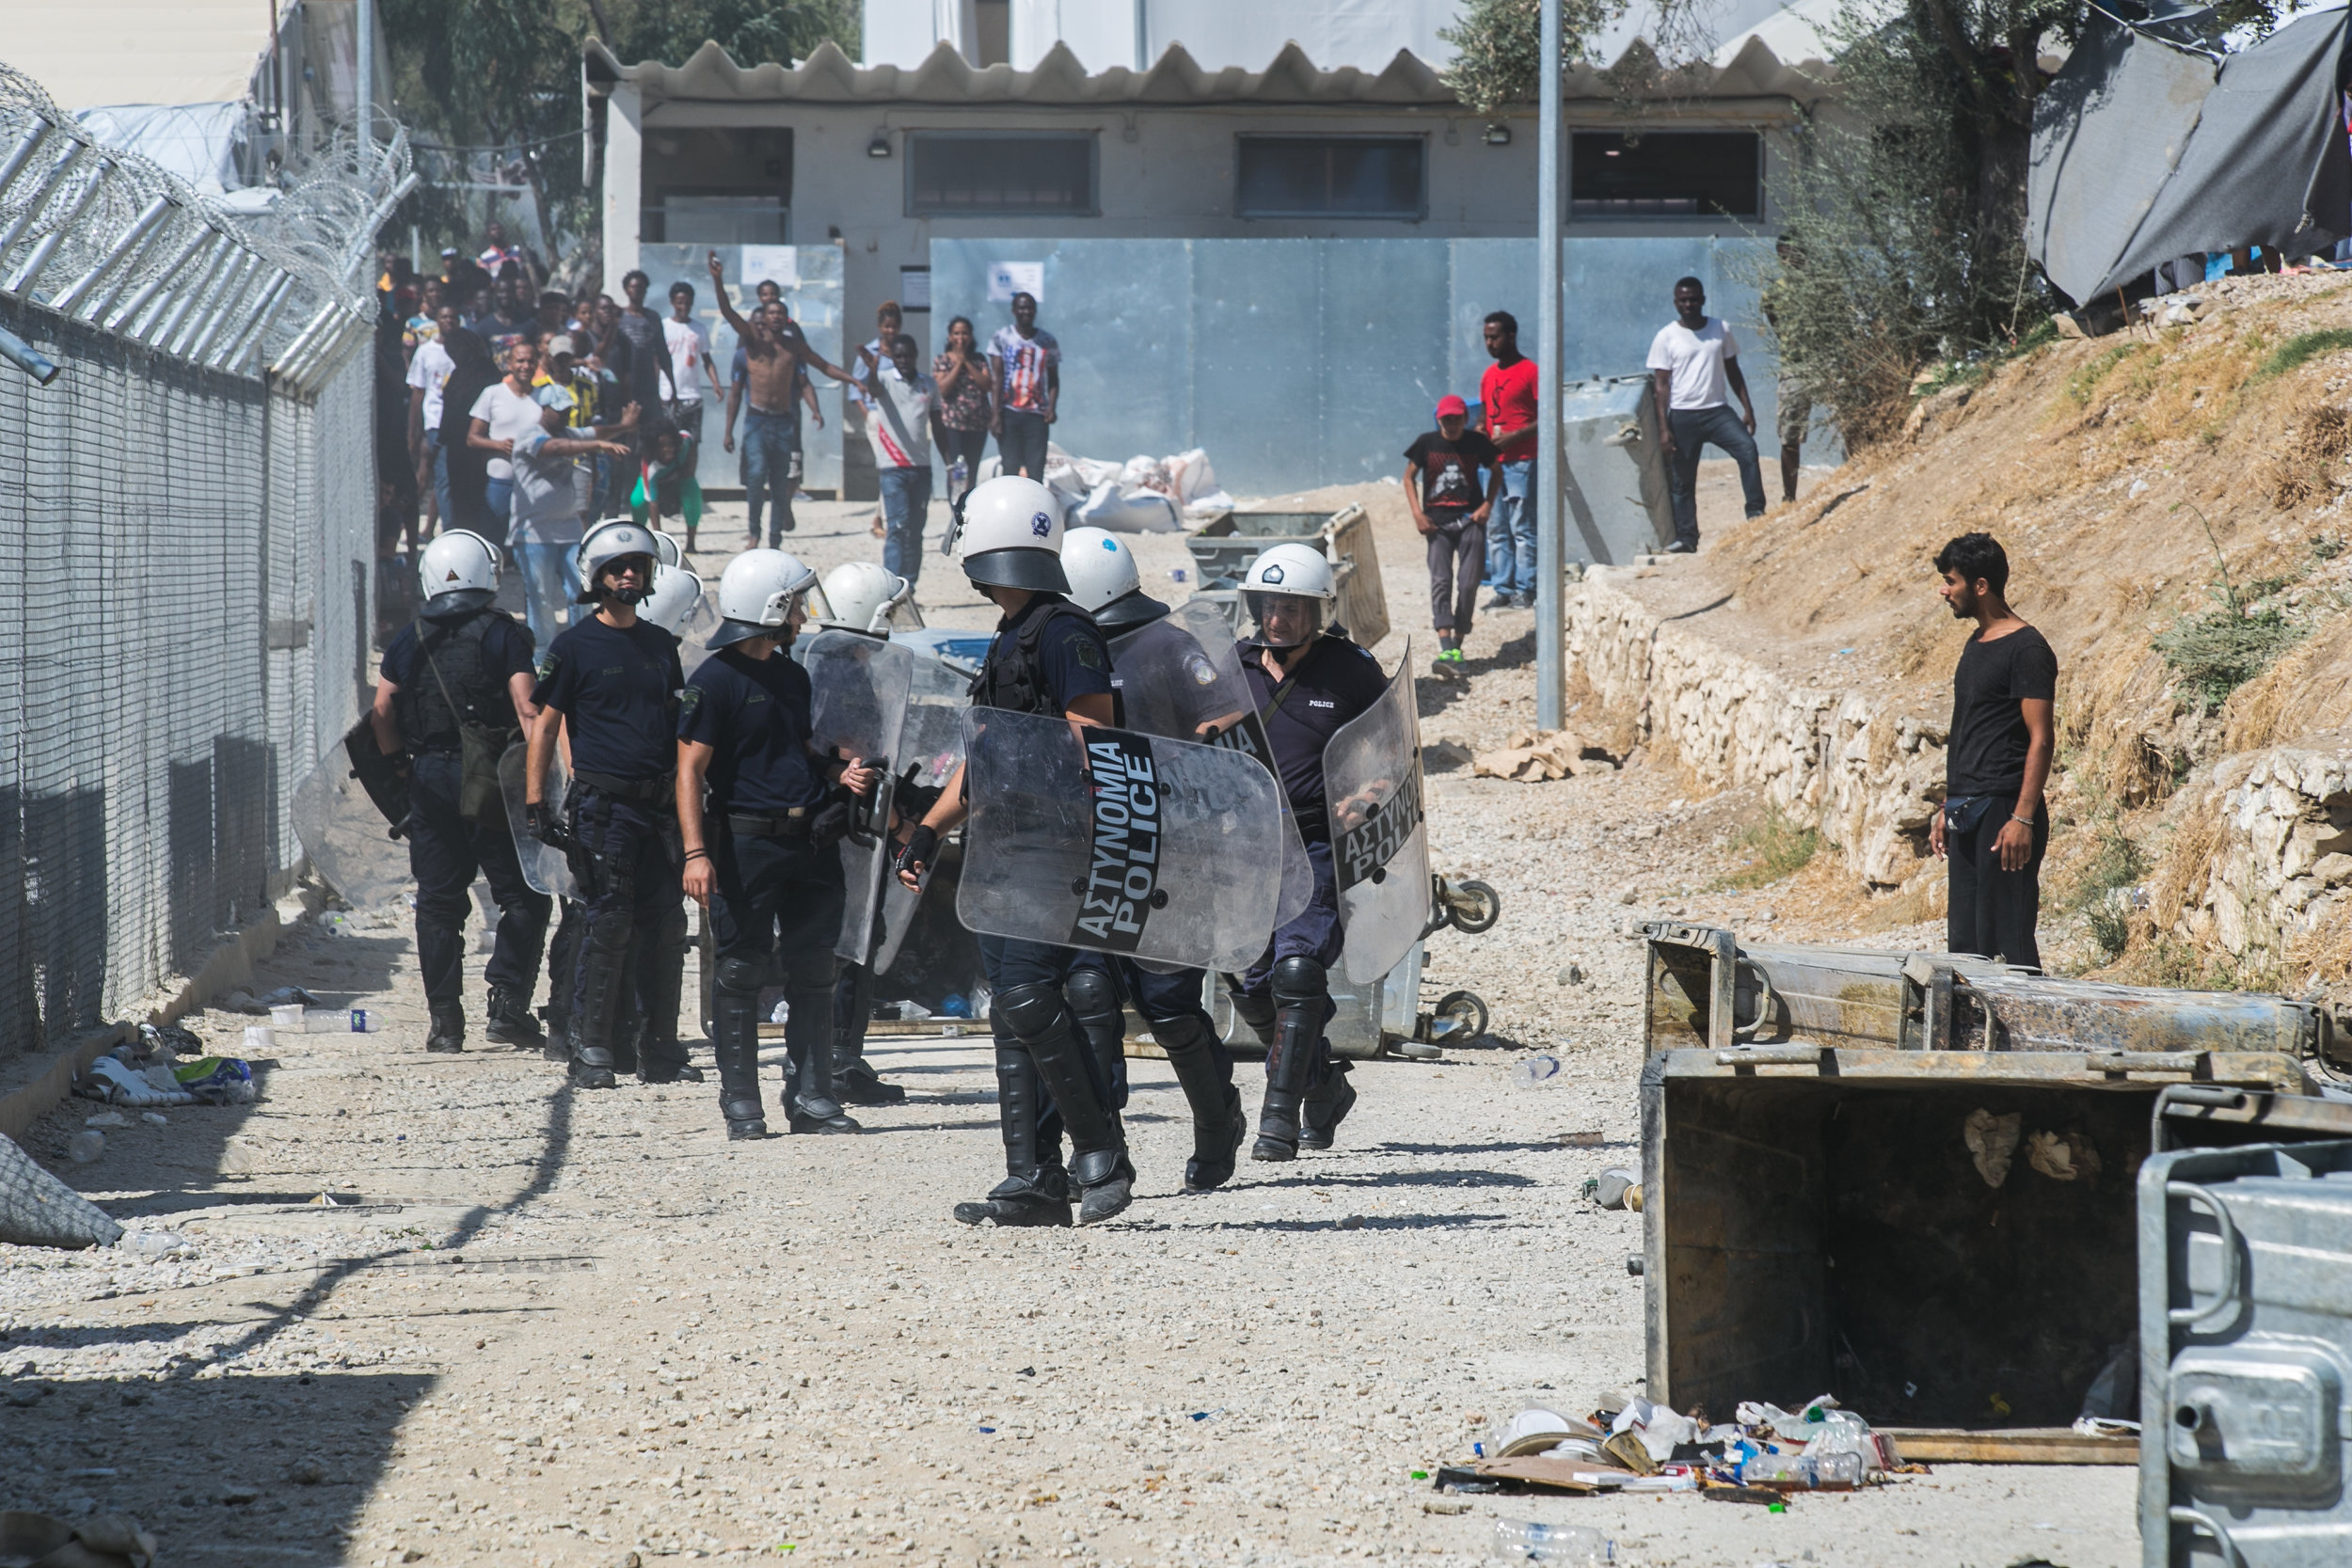   mikeschwarzthekid Riot police react as a crowd of Turkish and Syrian refugees begin to throw rocks outside the entrance to a camp in Moria, Lesvos. The riot began earlier this morning with refugees flipping dumpsters, lighting trash on fire, and ta